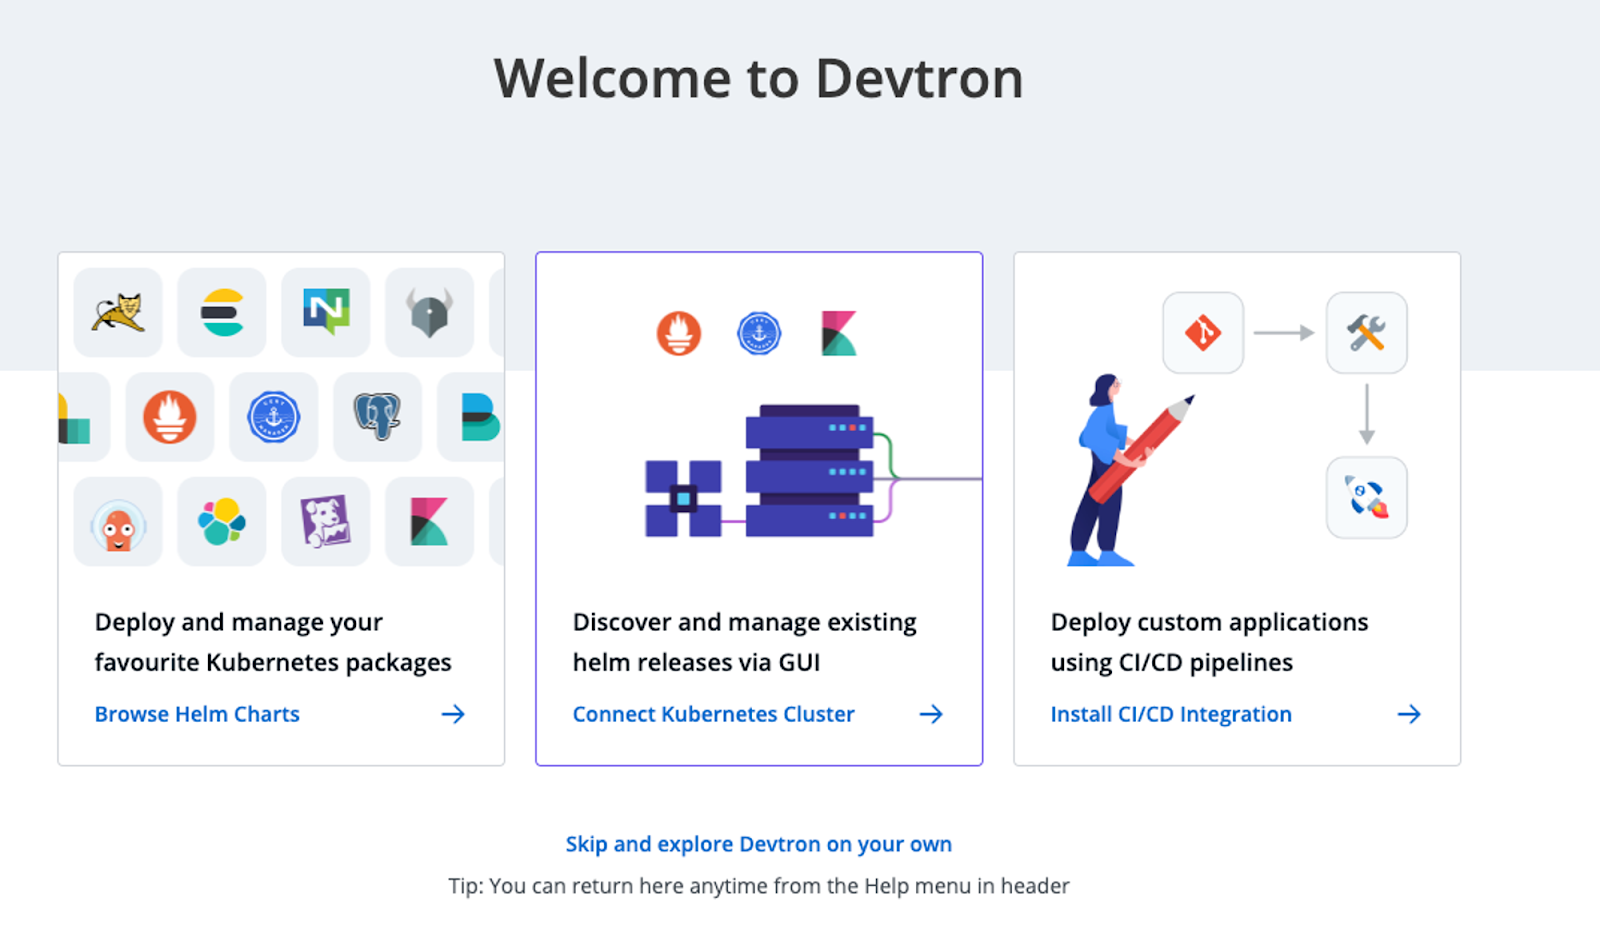 Deploying and Configuring Devtron